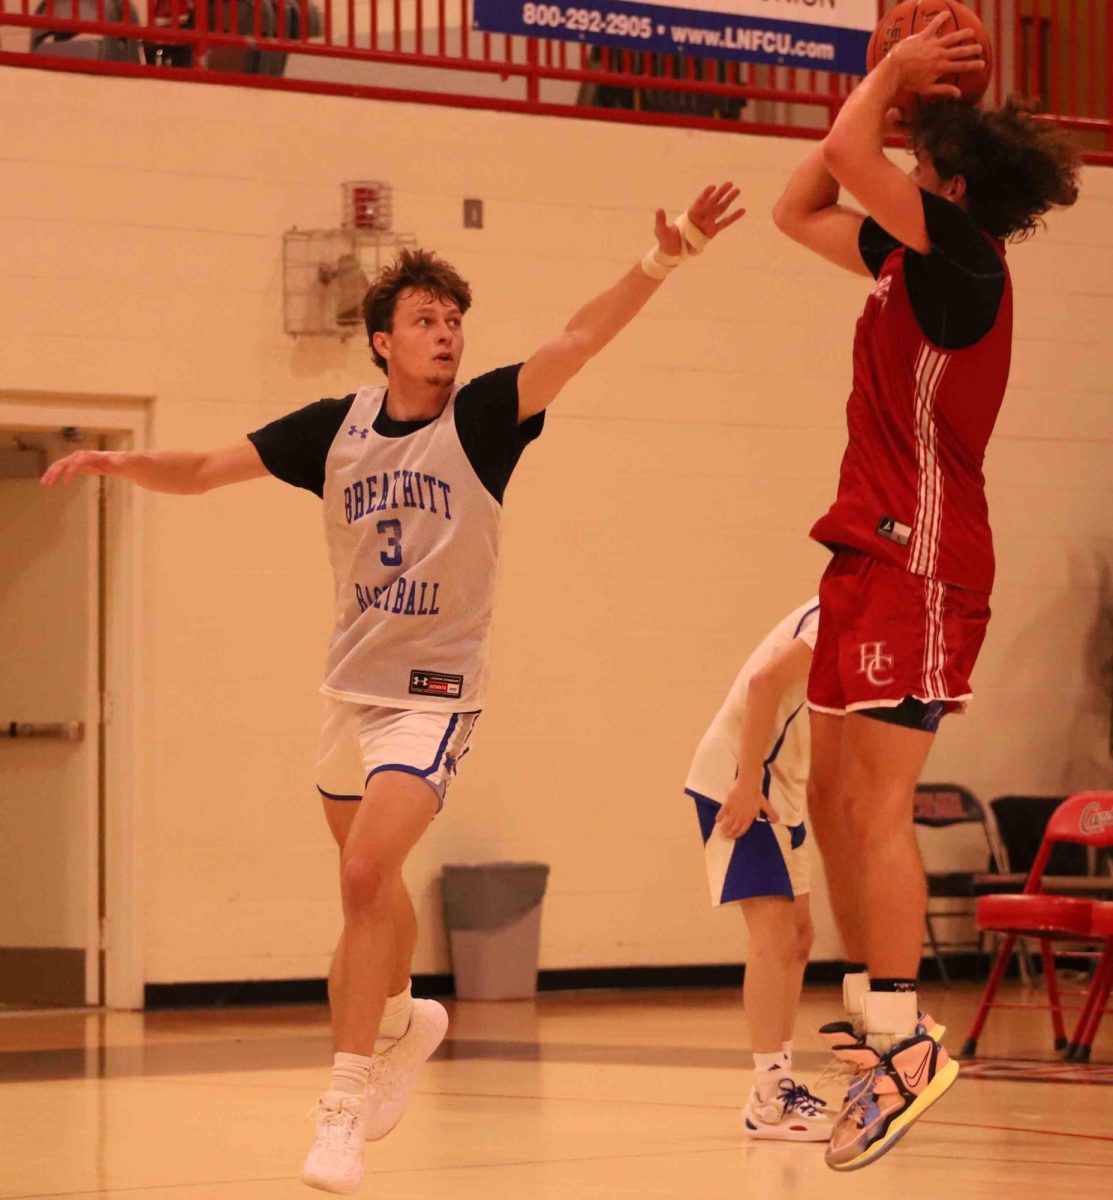 It was a battle of all-staters on Monday at South Laurel as Harlan Countys Maddox Huff put up a shot over Breathitt Countys Austin Sperry. The two are ranked among the states top players in the Class of 2025. Huff scored 27 points in the Bears 76-64 win.